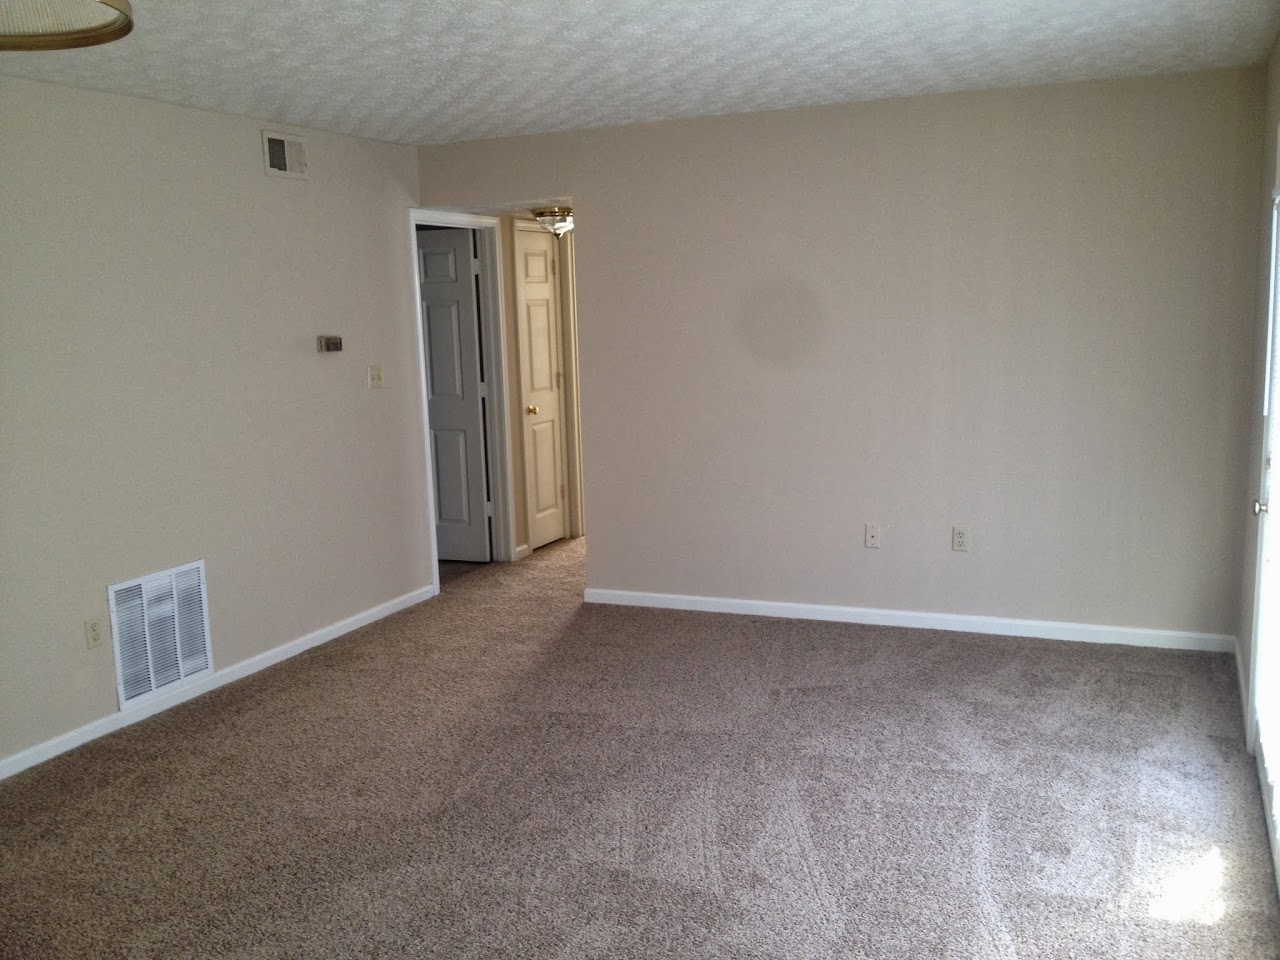 Photo of PARKSIDE EAST APARTMENTS, LTD.. Affordable housing located at HOLTZCLAW AVE. DANVILLE, KY 40422